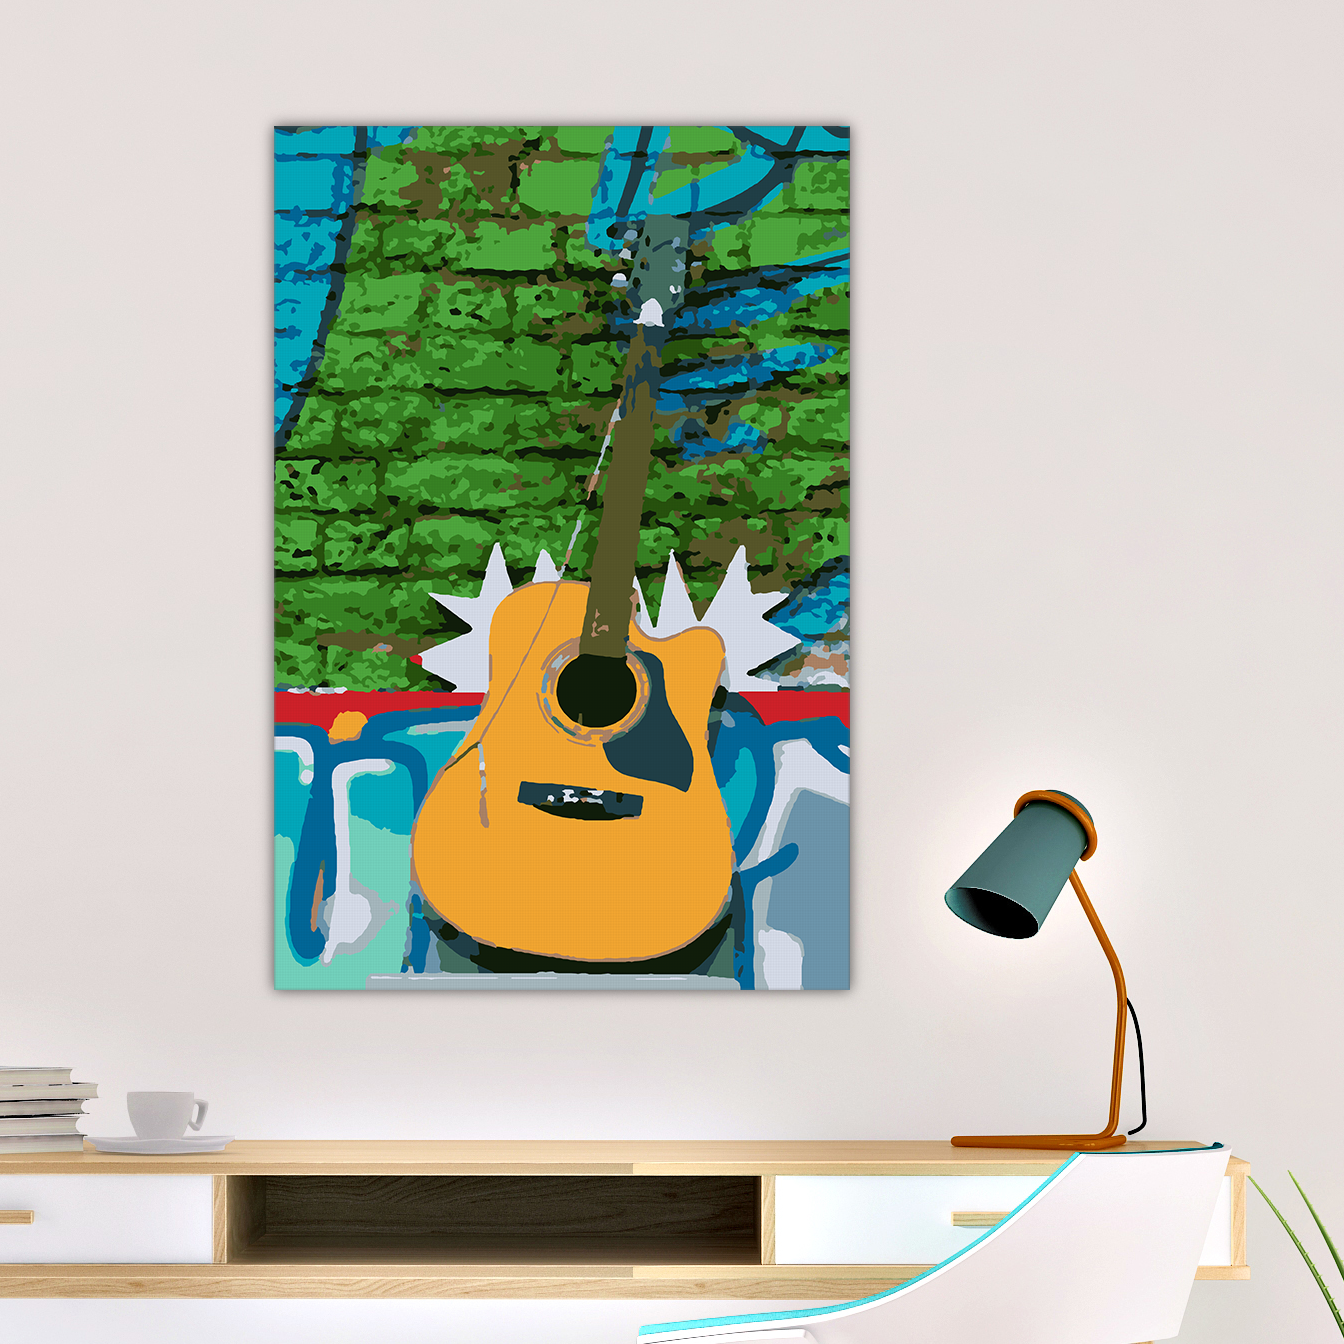 Graffiti and Guitar - Paint By Numbers Kit